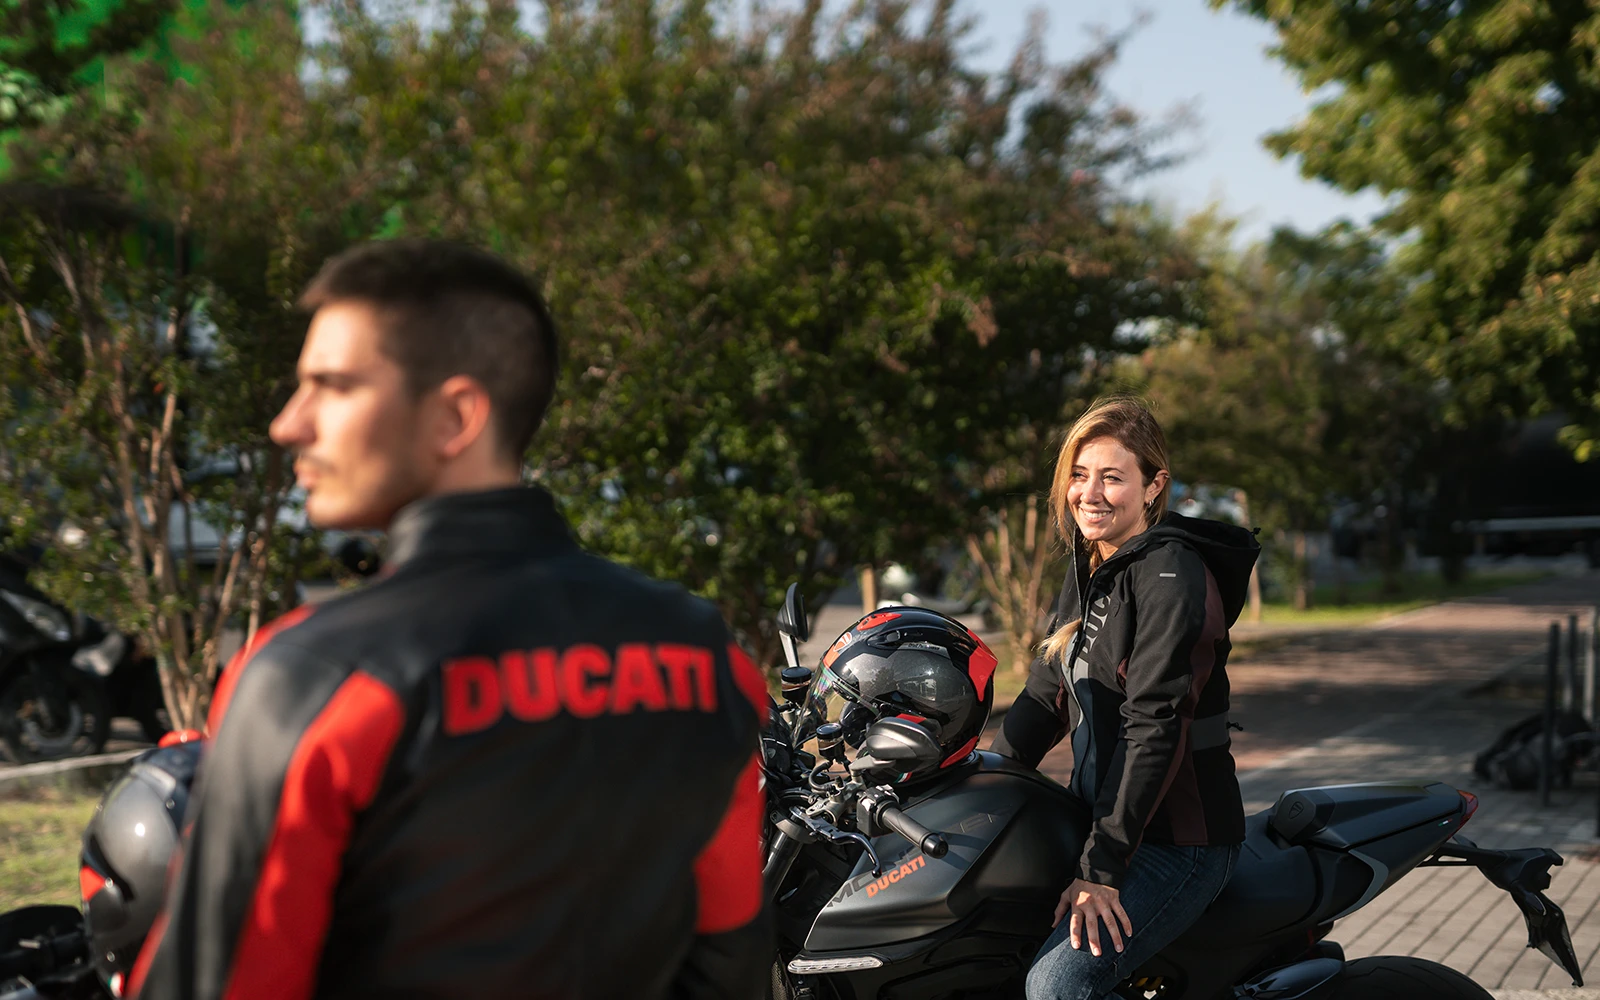 Ducati Apparel  Bikers' clothing and accessories for men, women